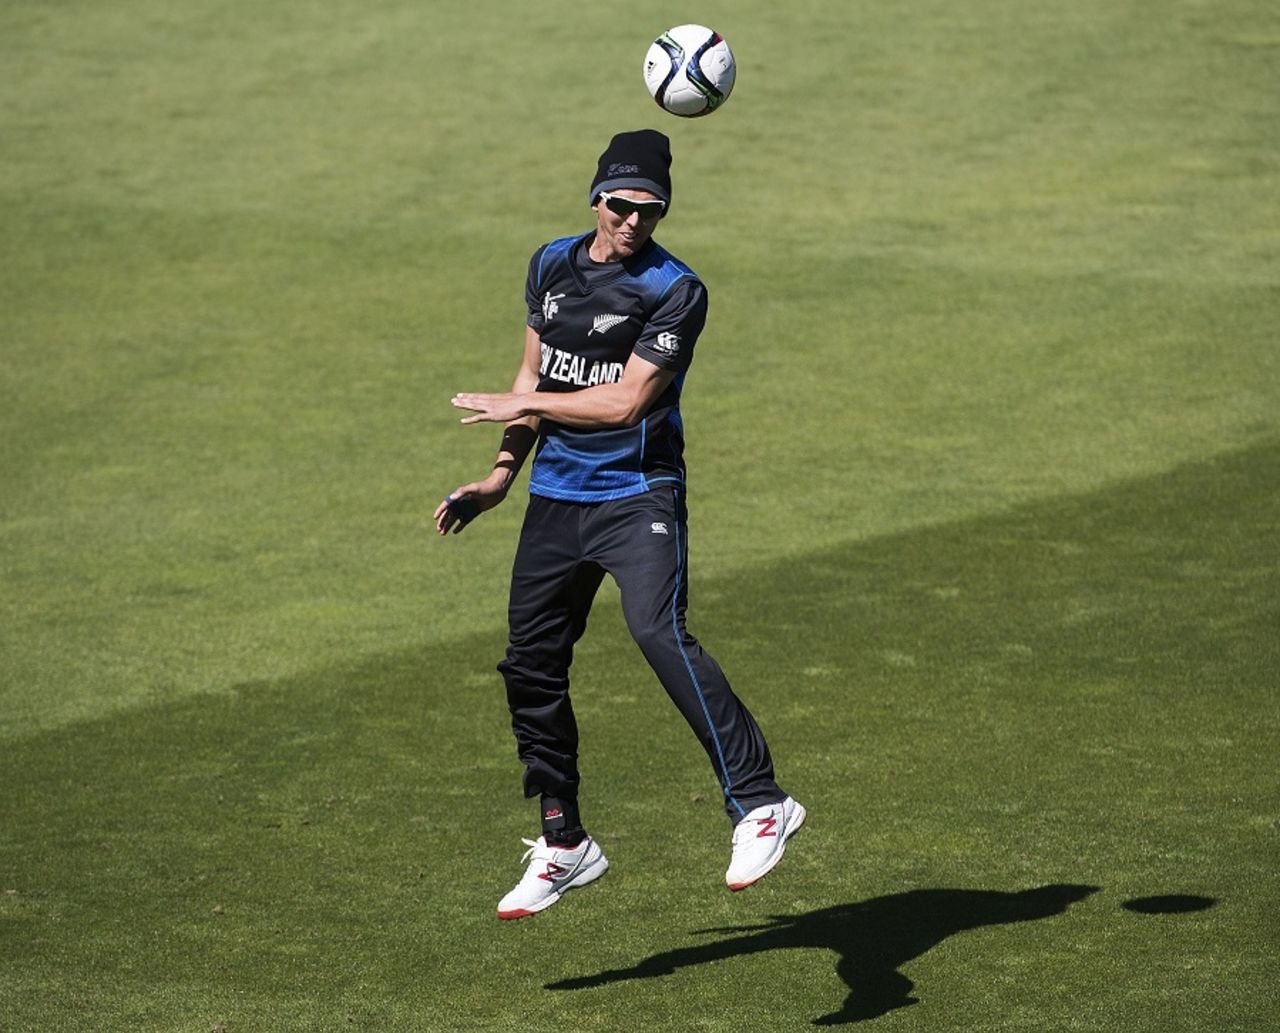 Into the top corner: Trent Boult trains ahead of the quarter-final, New Zealand v West indies, World Cup 2015, 4th quarter-final, Wellington, March 20, 2015